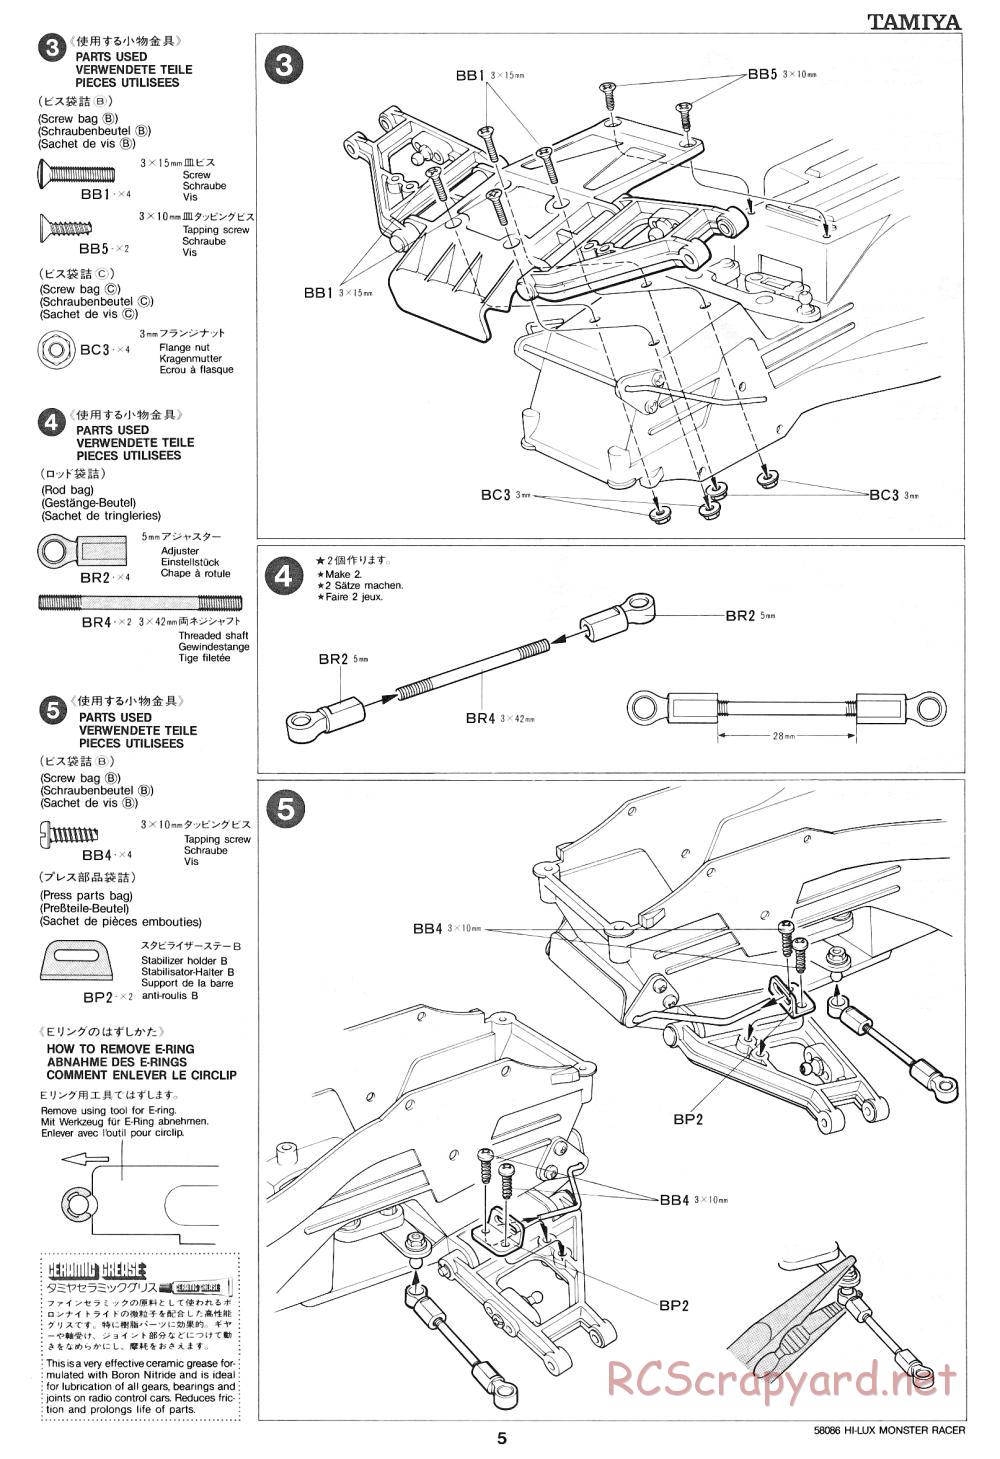 Tamiya - Toyota Hilux Monster Racer - 58086 - Manual - Page 5